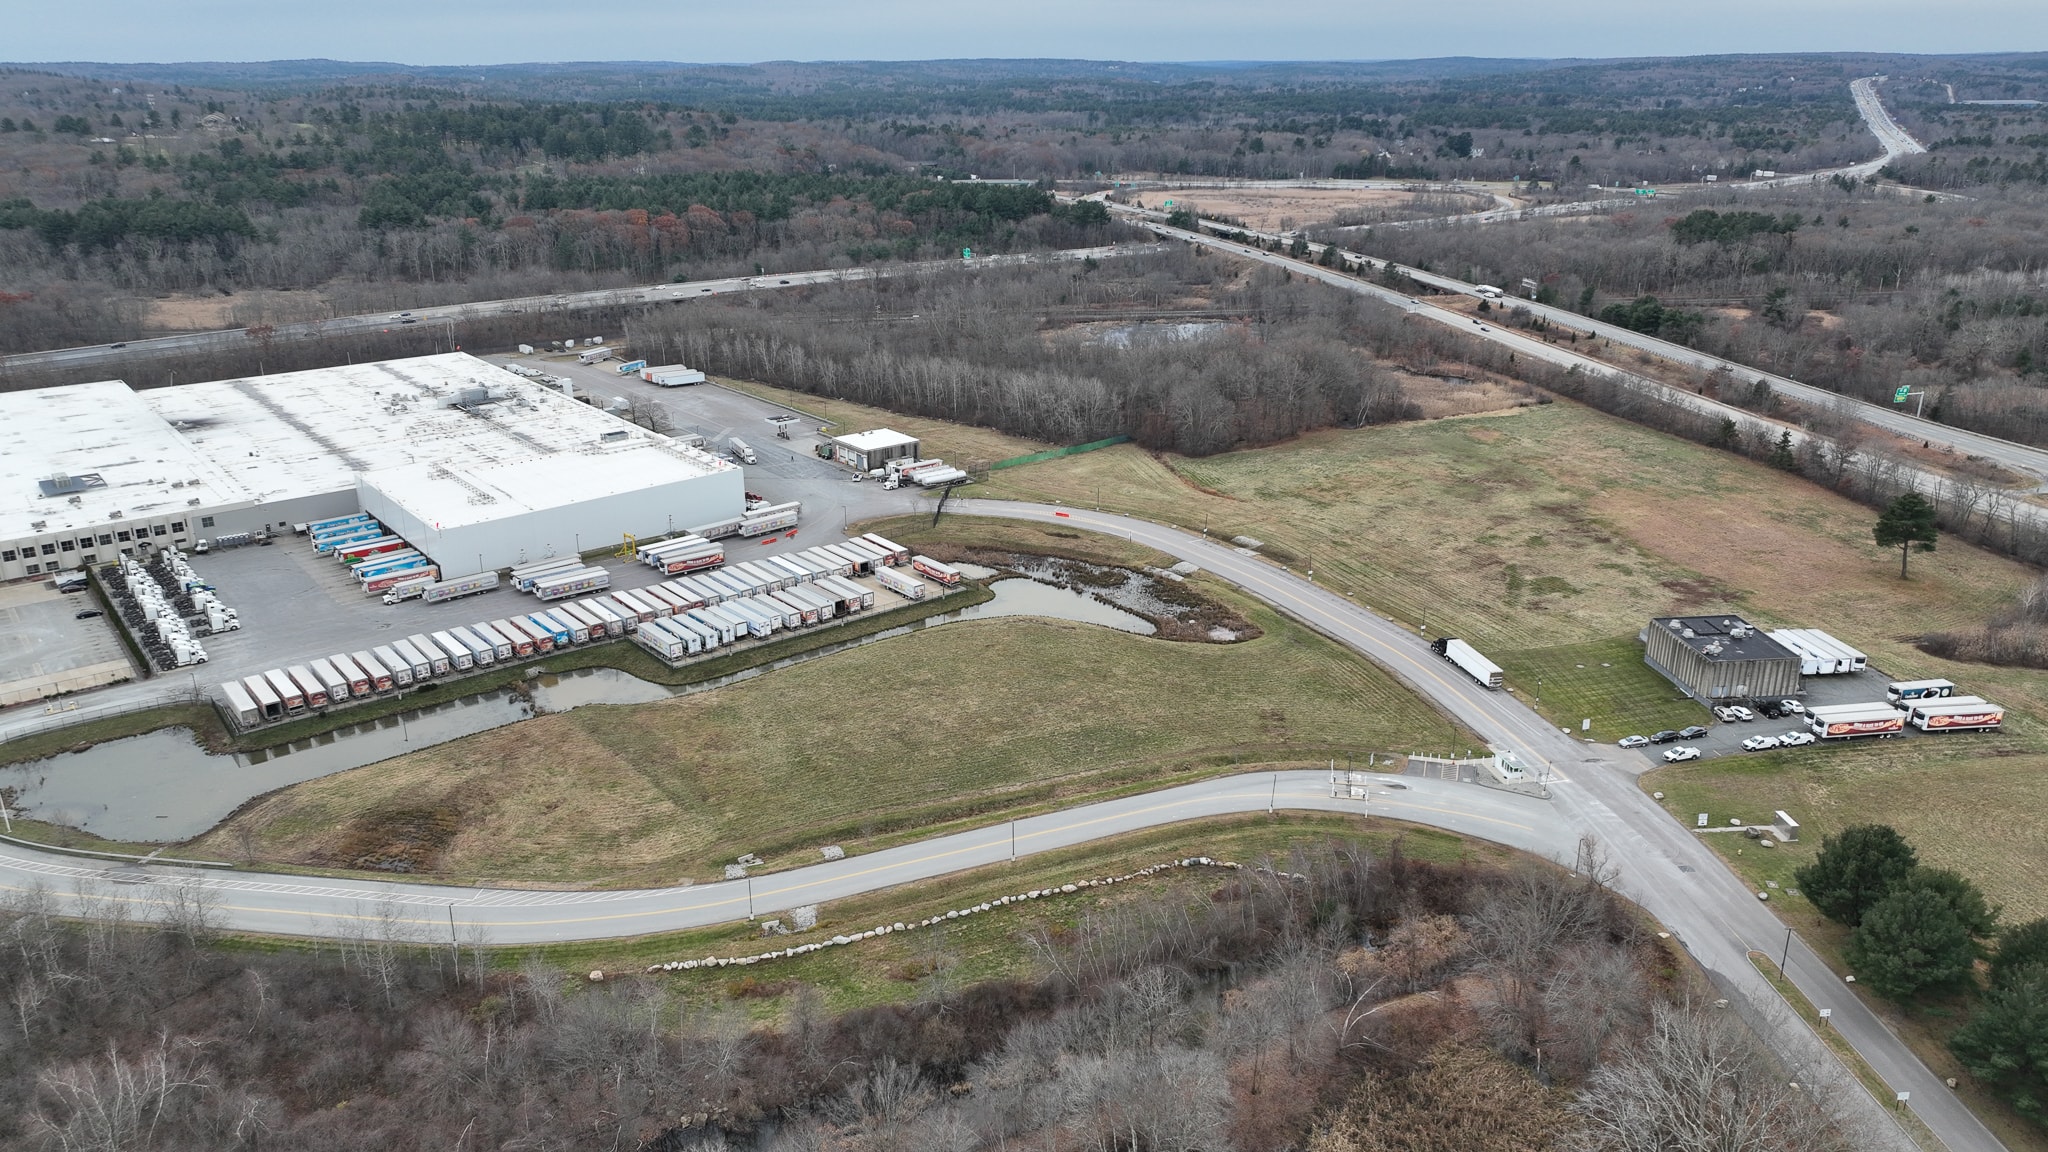 Drone photography recently showed the Cumberland Farms/EG Group facility at 165 Flanders Road in Westborough. EG, which acquired Cumberland Farms in 2019,is looking to expand the parking lot at its Westborough facility. (Photo/Tami White)